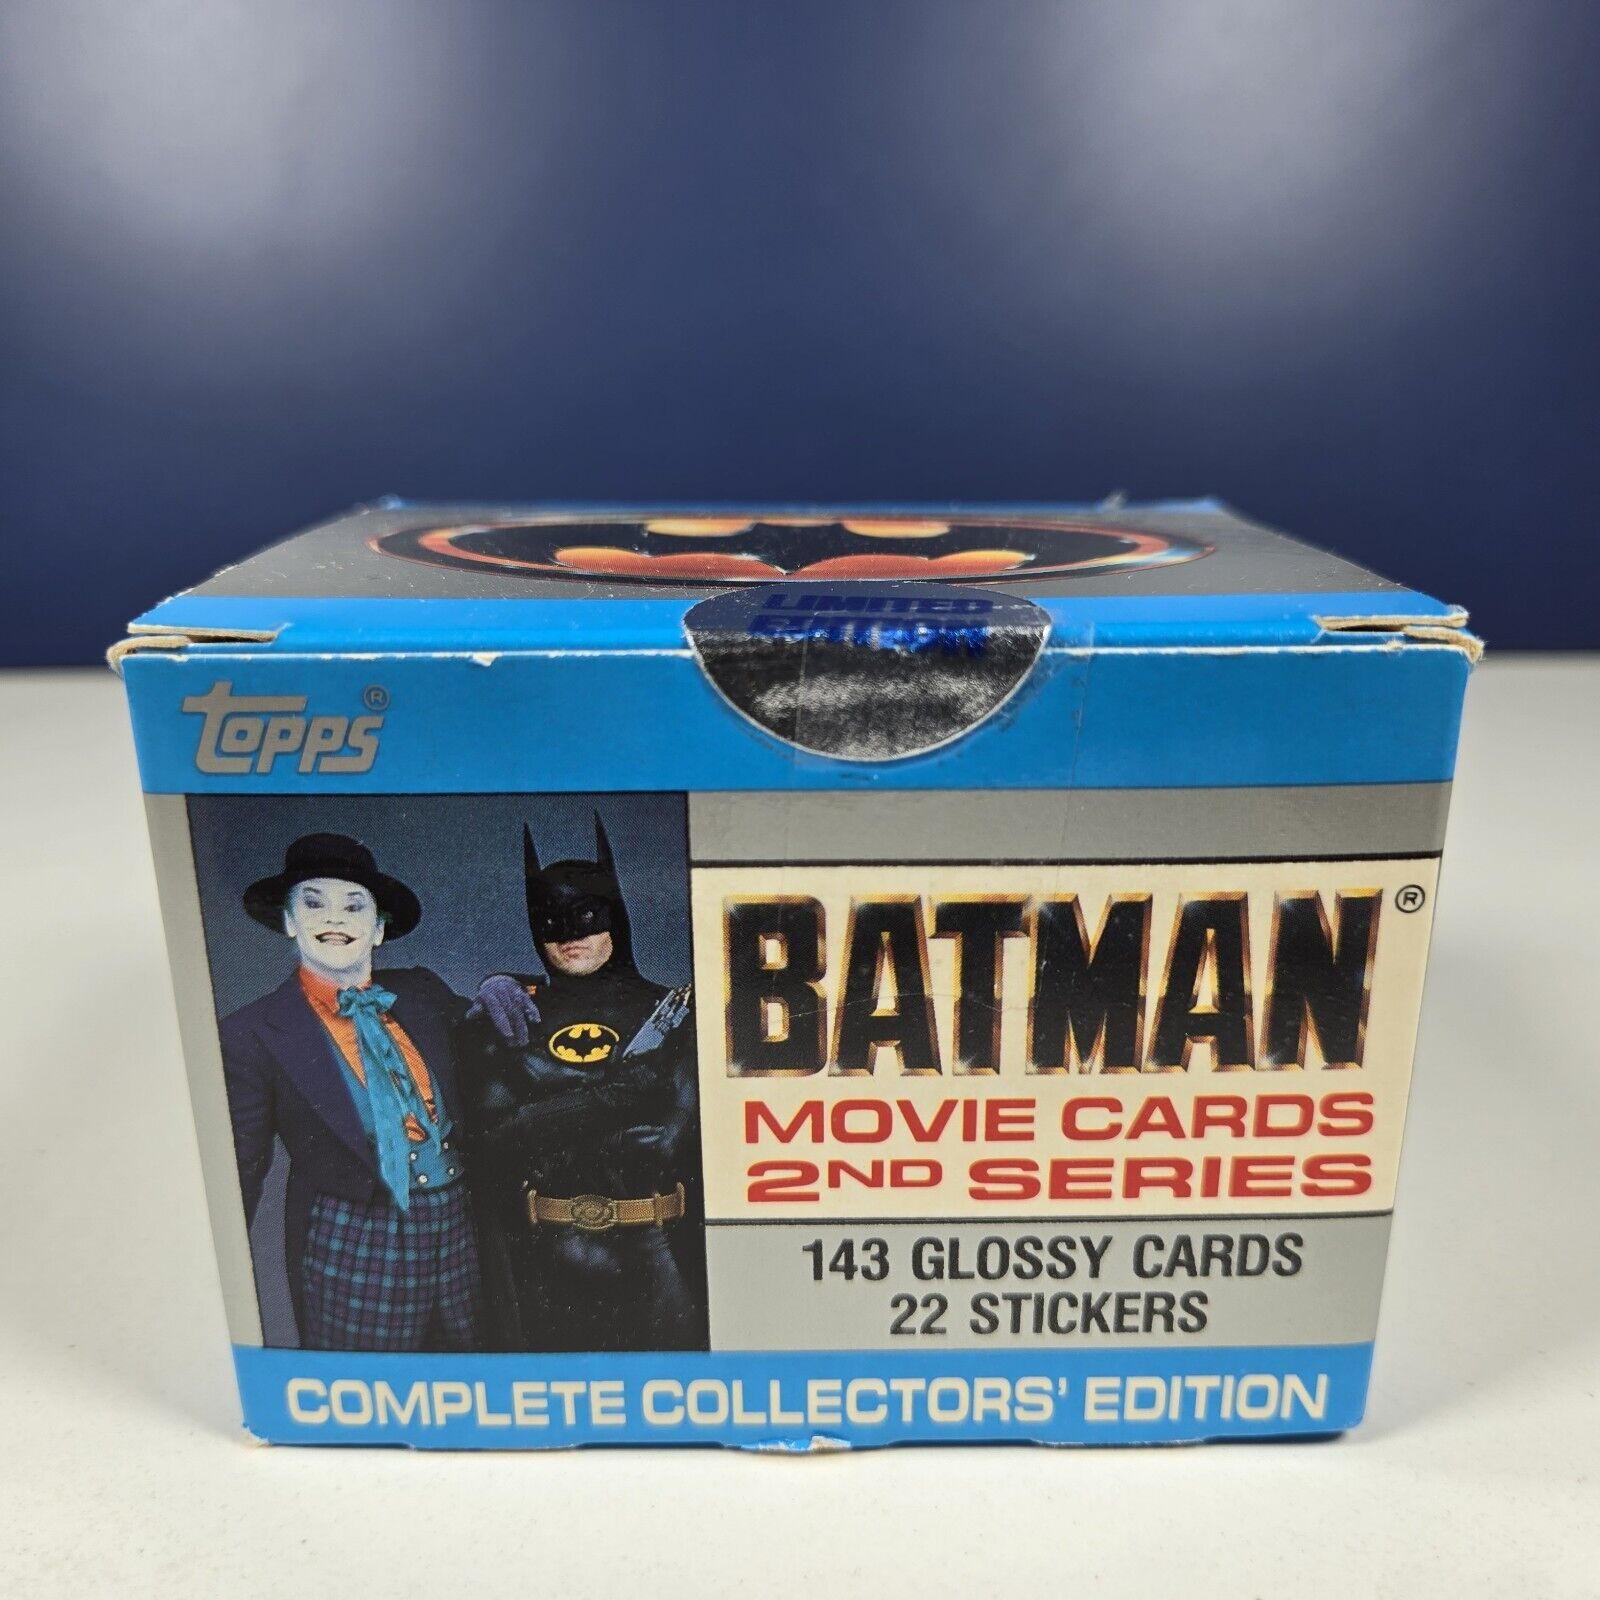 1989 Batman Movie Cards 2nd Series Complete Collectors\' Limited Edition Set